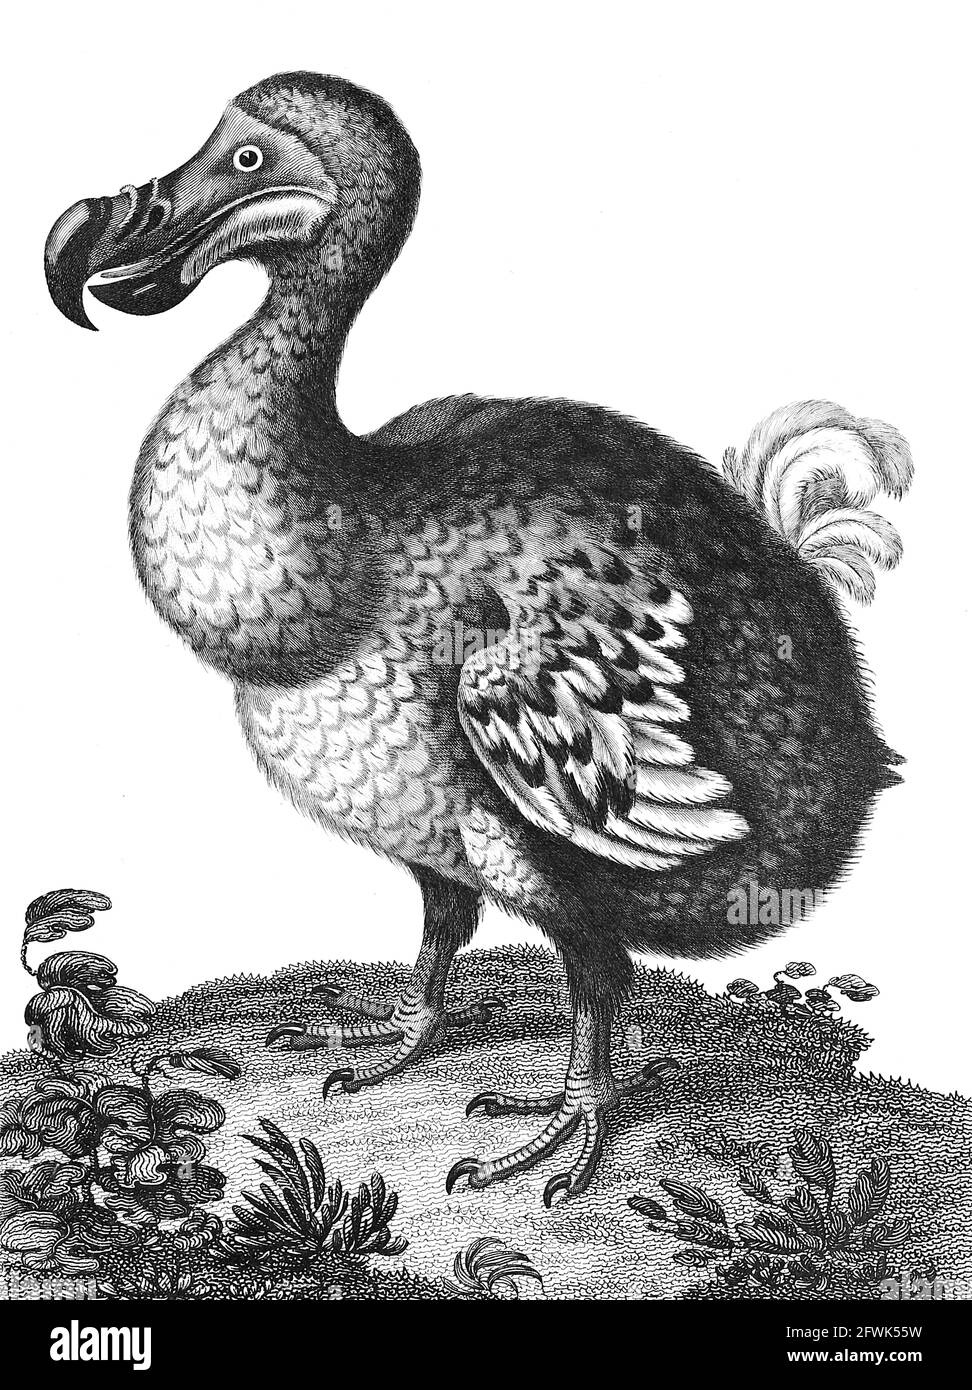 Didus The Hooded Dodo [The dodo (Raphus cucullatus) is an extinct flightless bird that was endemic to the island of Mauritius, east of Madagascar in the Indian Ocean. The dodo's closest genetic relative was the also-extinct Rodrigues solitaire, the two forming the subfamily Raphinae of the family of pigeons and doves]. Copperplate engraving From the Encyclopaedia Londinensis or, Universal dictionary of arts, sciences, and literature; Volume V;  Edited by Wilkes, John. Published in London in 1810 Stock Photo